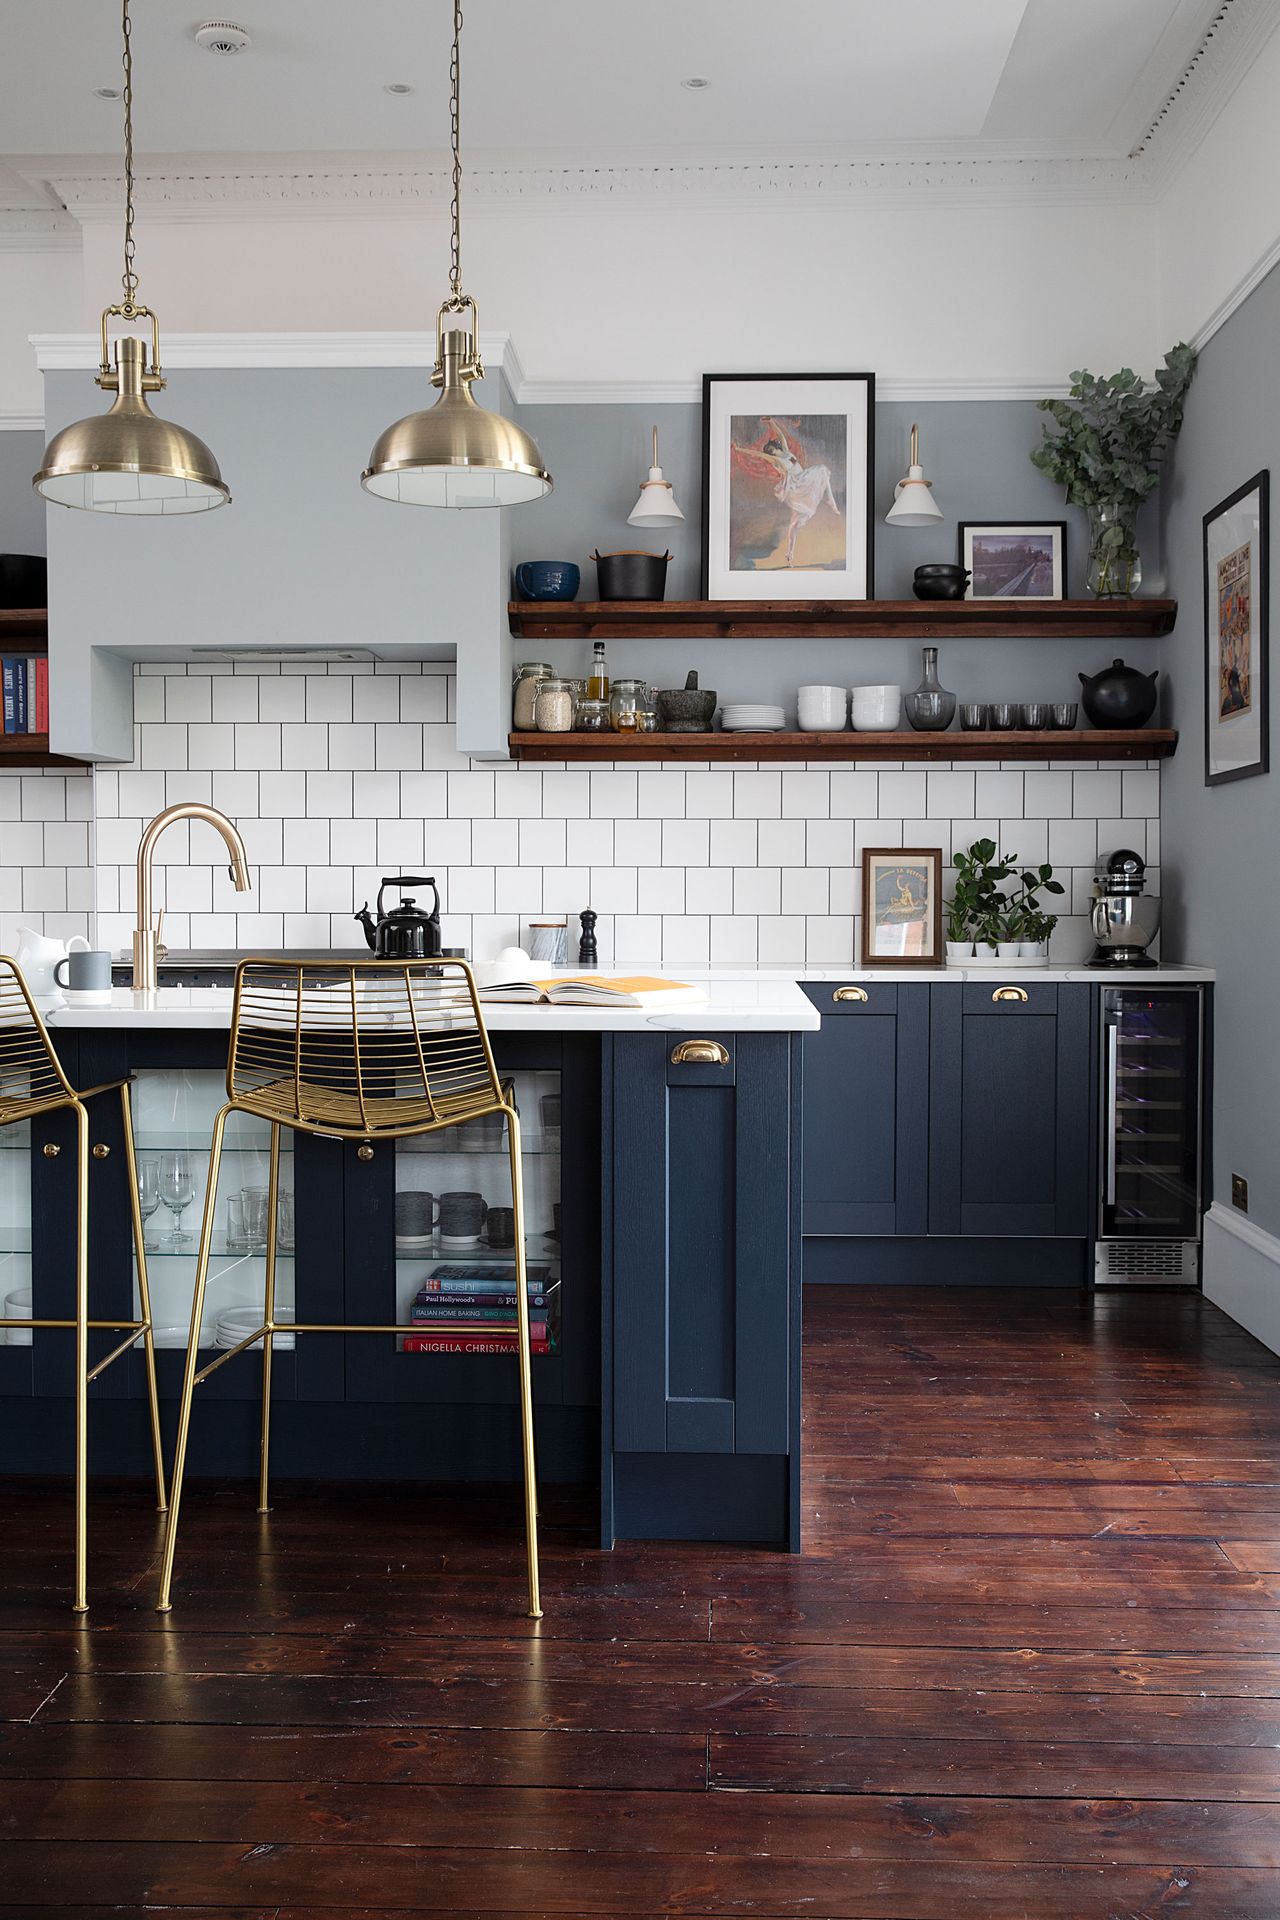 Real home: Elegant renovation of a tenement flat is just what the ...